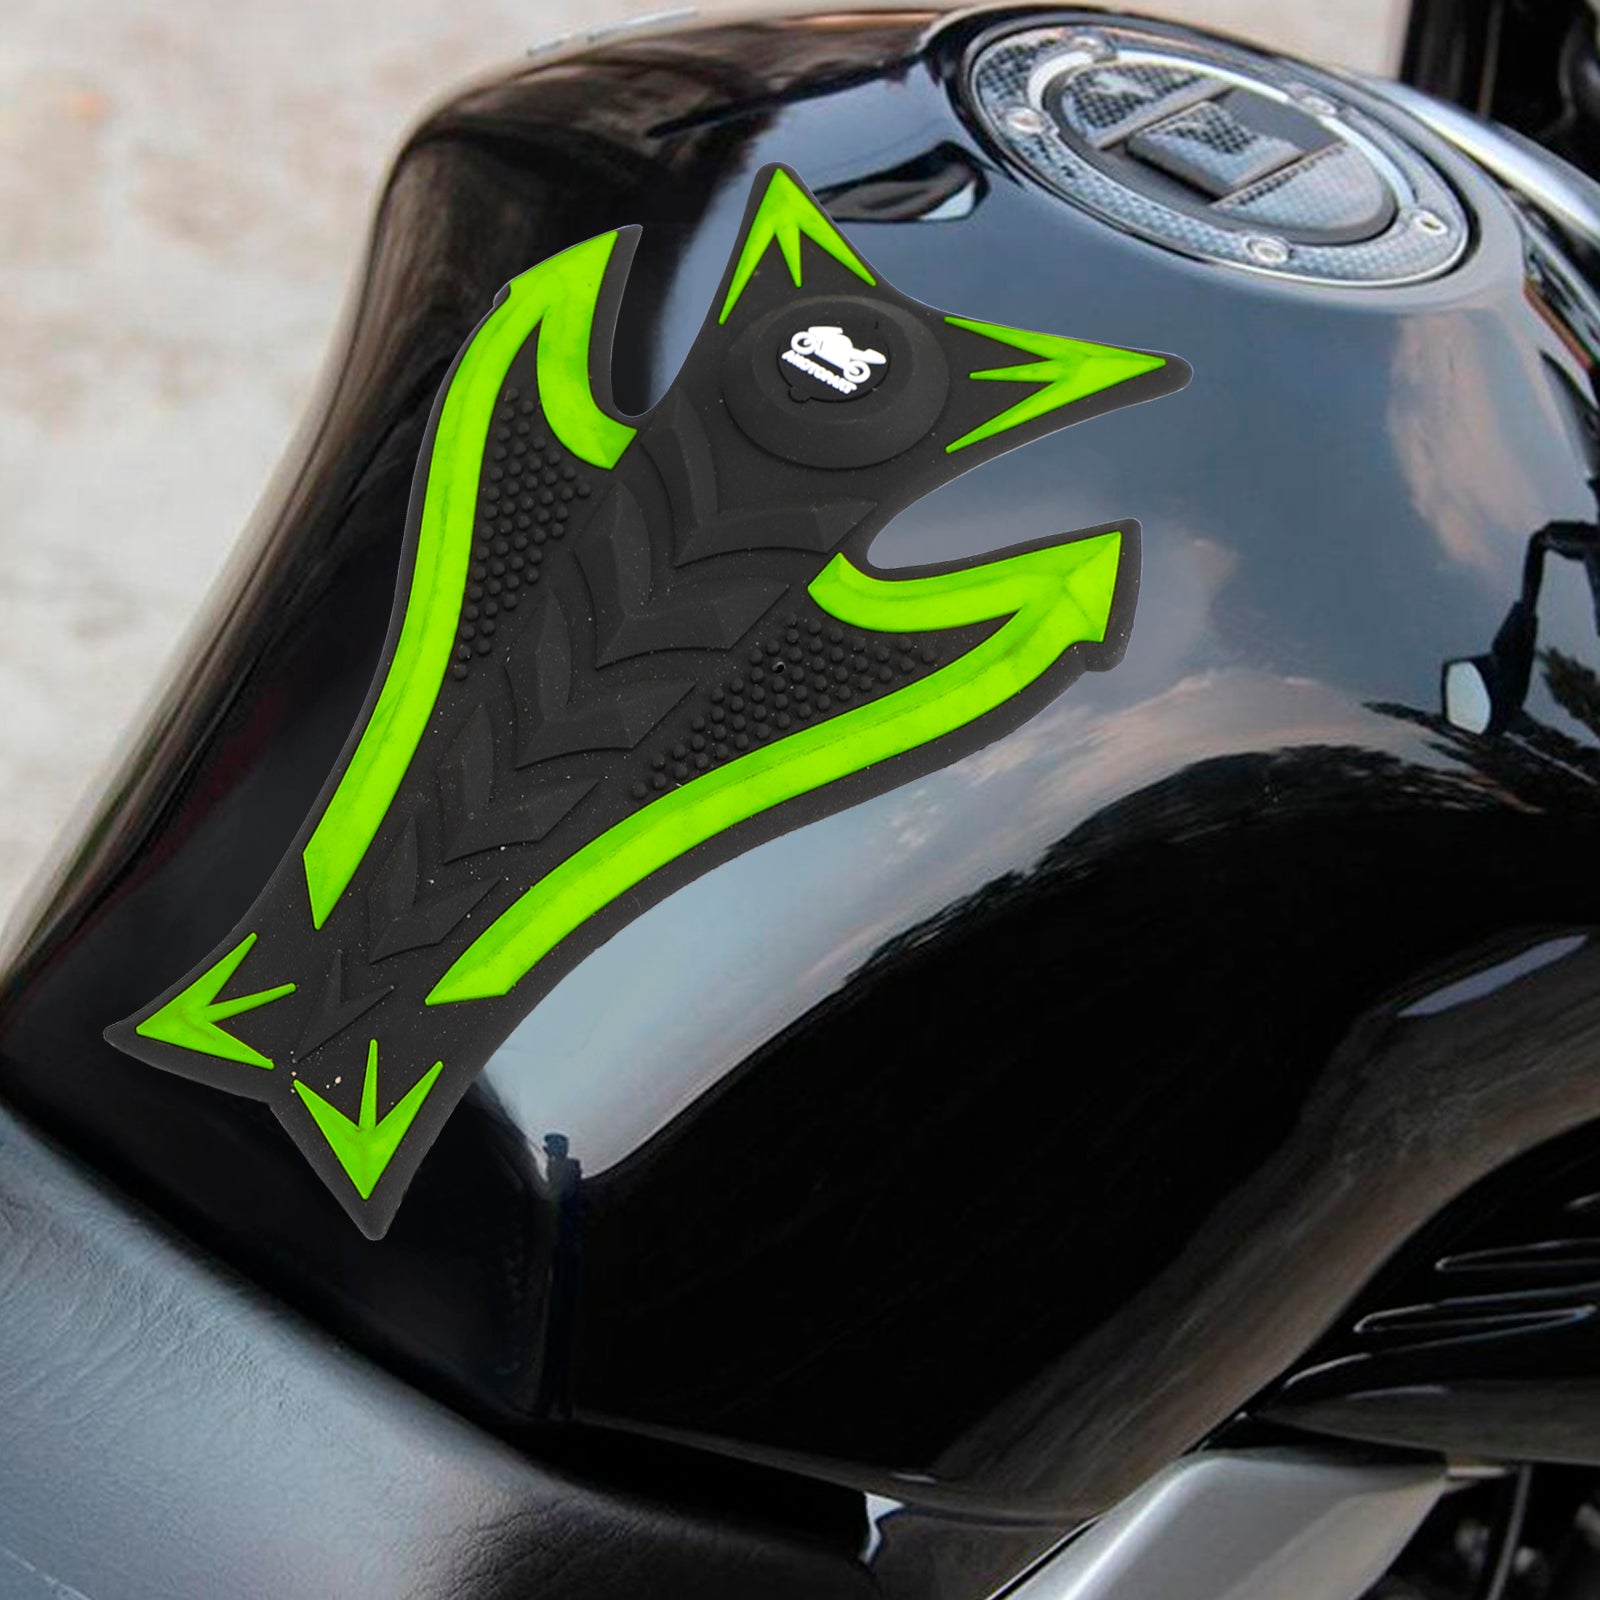 3D Motorcycle Rubber Gel Gas Tank Pad Protector Decal and Sticker Tankpad